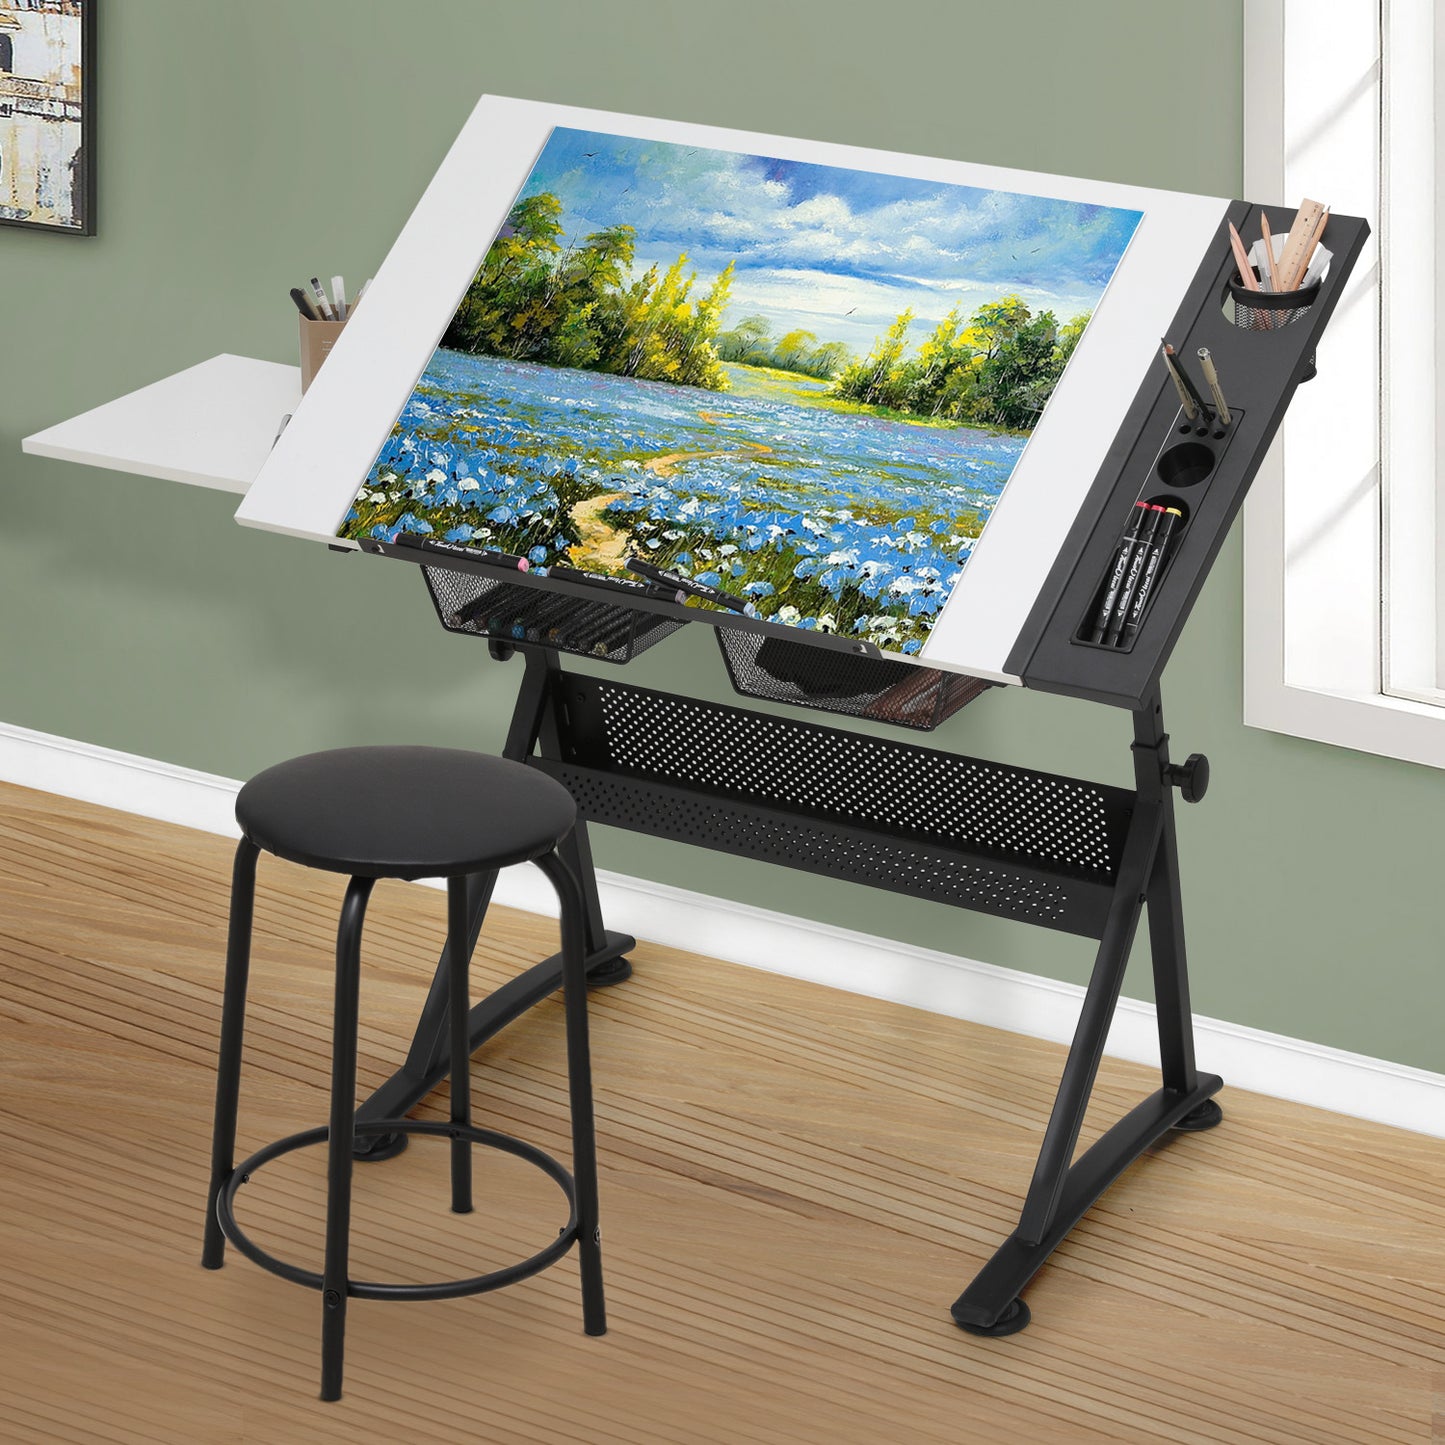 Drafting Table - 61" White desktop with black frame, 2 mesh drawers, with black stool